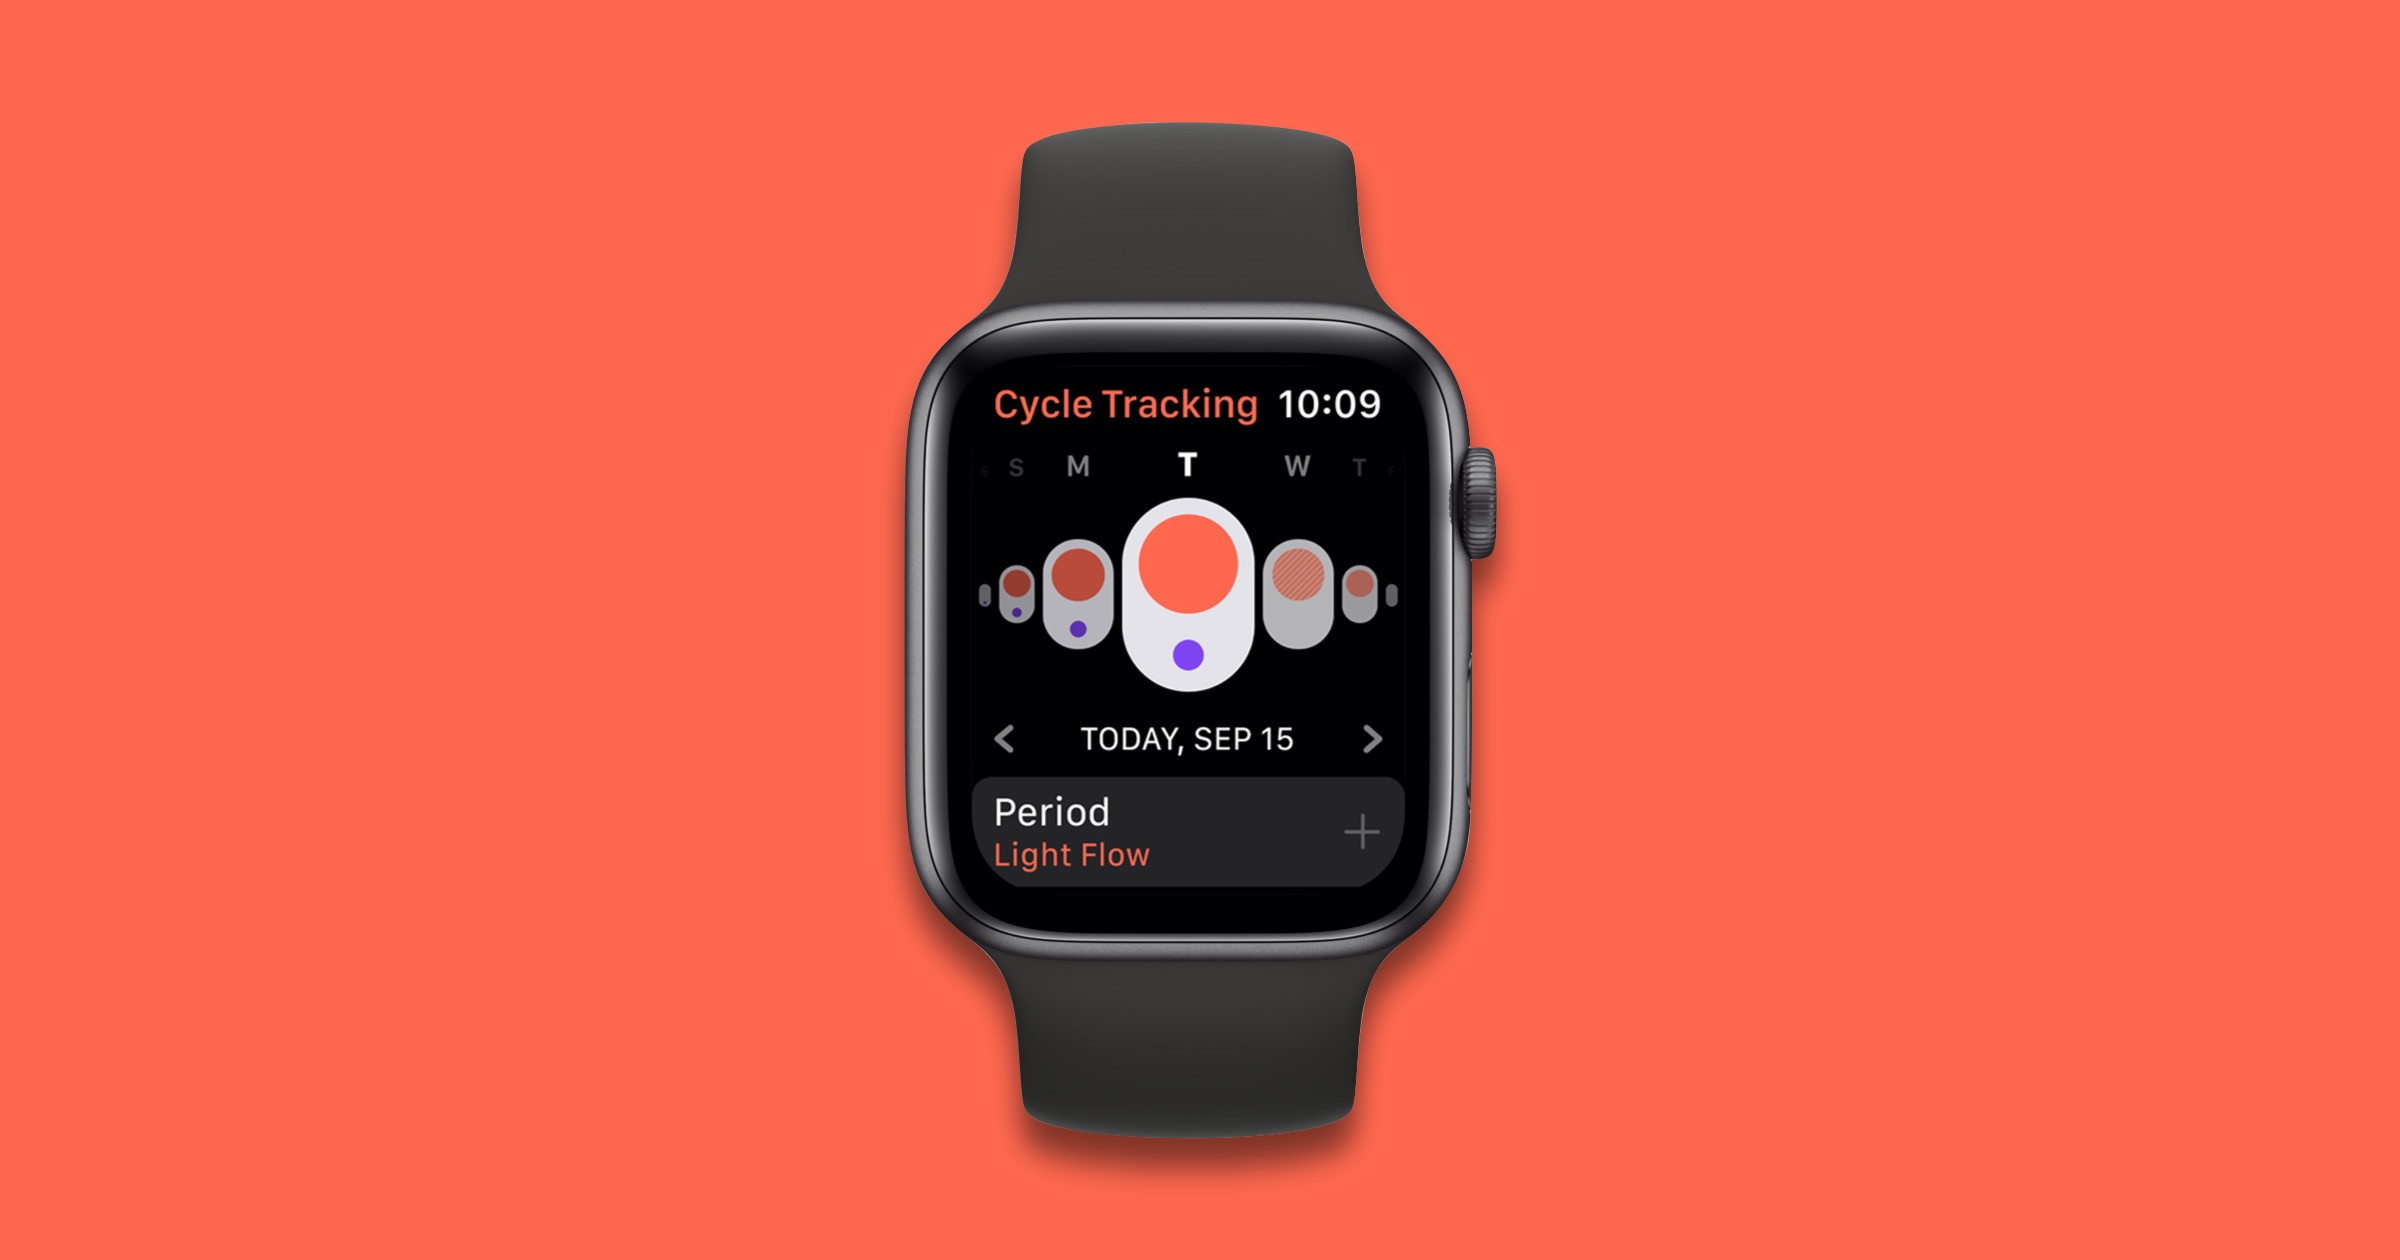 Cycle tracking on Apple Watch